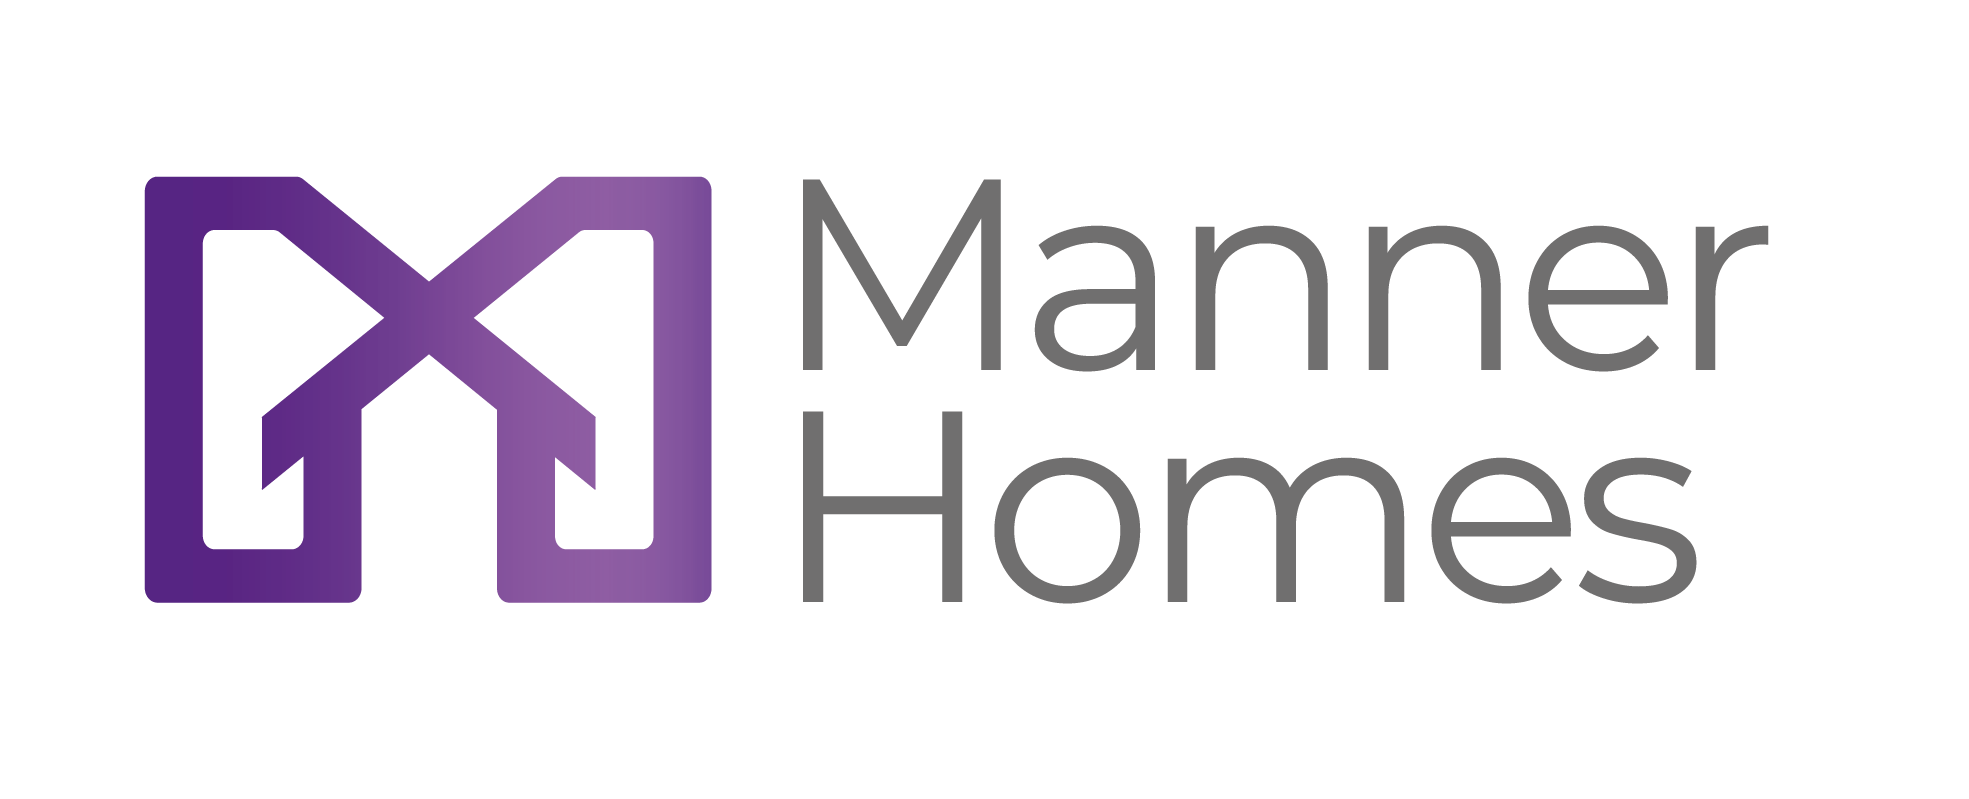 Manner Homes logo design by logo designer Anna Brand Creative Ltd for your inspiration and for the worlds largest logo competition